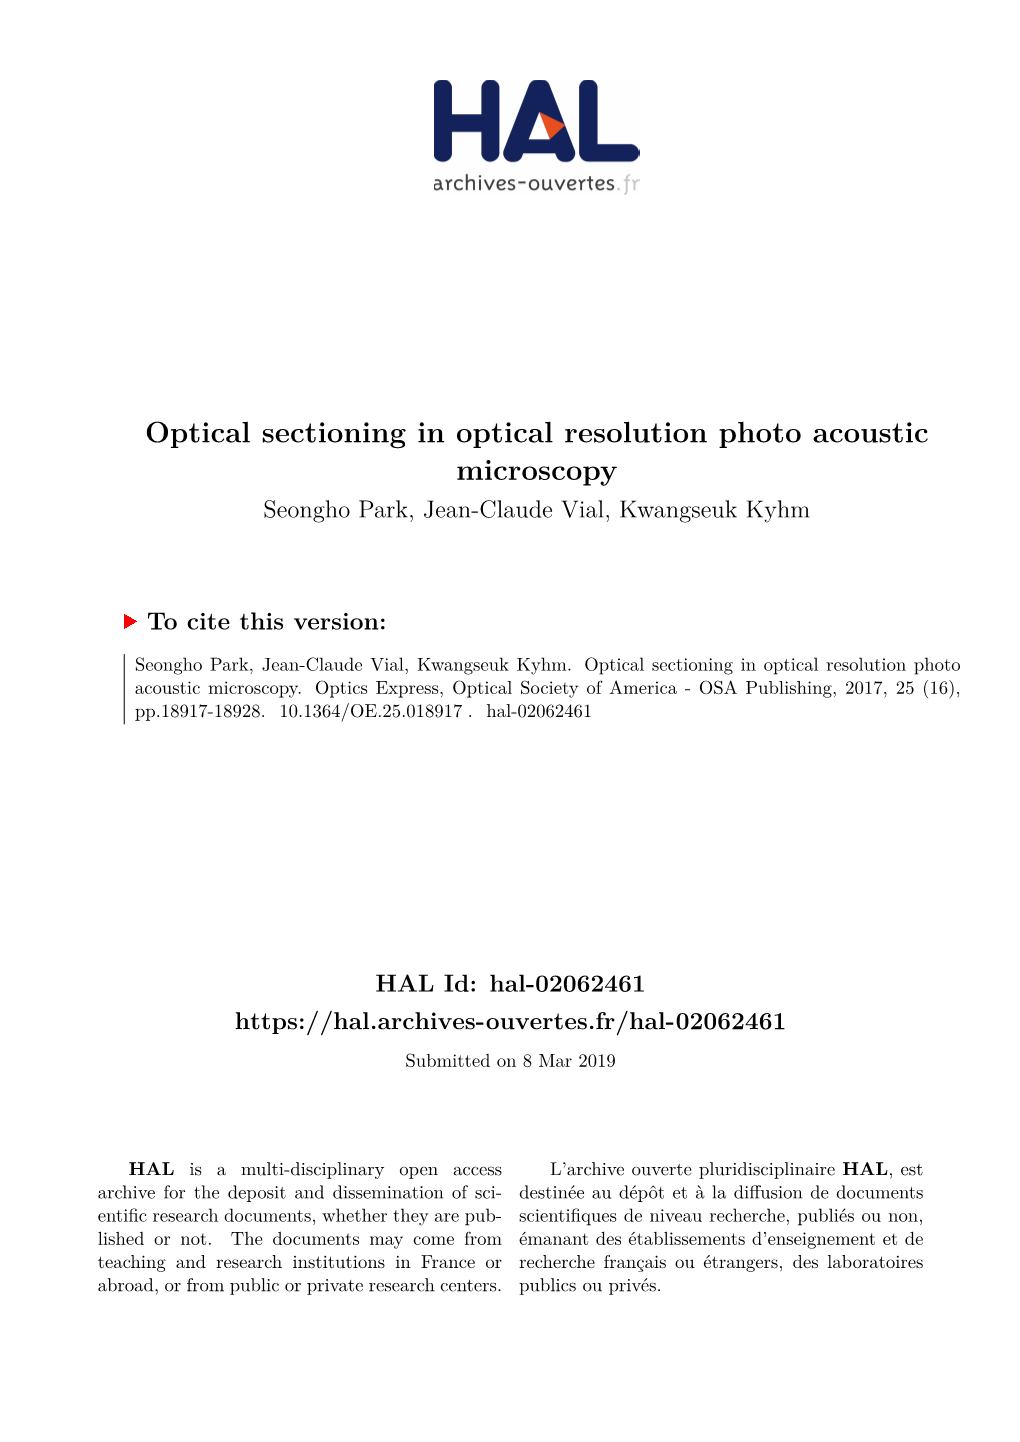 Optical Sectioning in Optical Resolution Photo Acoustic Microscopy Seongho Park, Jean-Claude Vial, Kwangseuk Kyhm